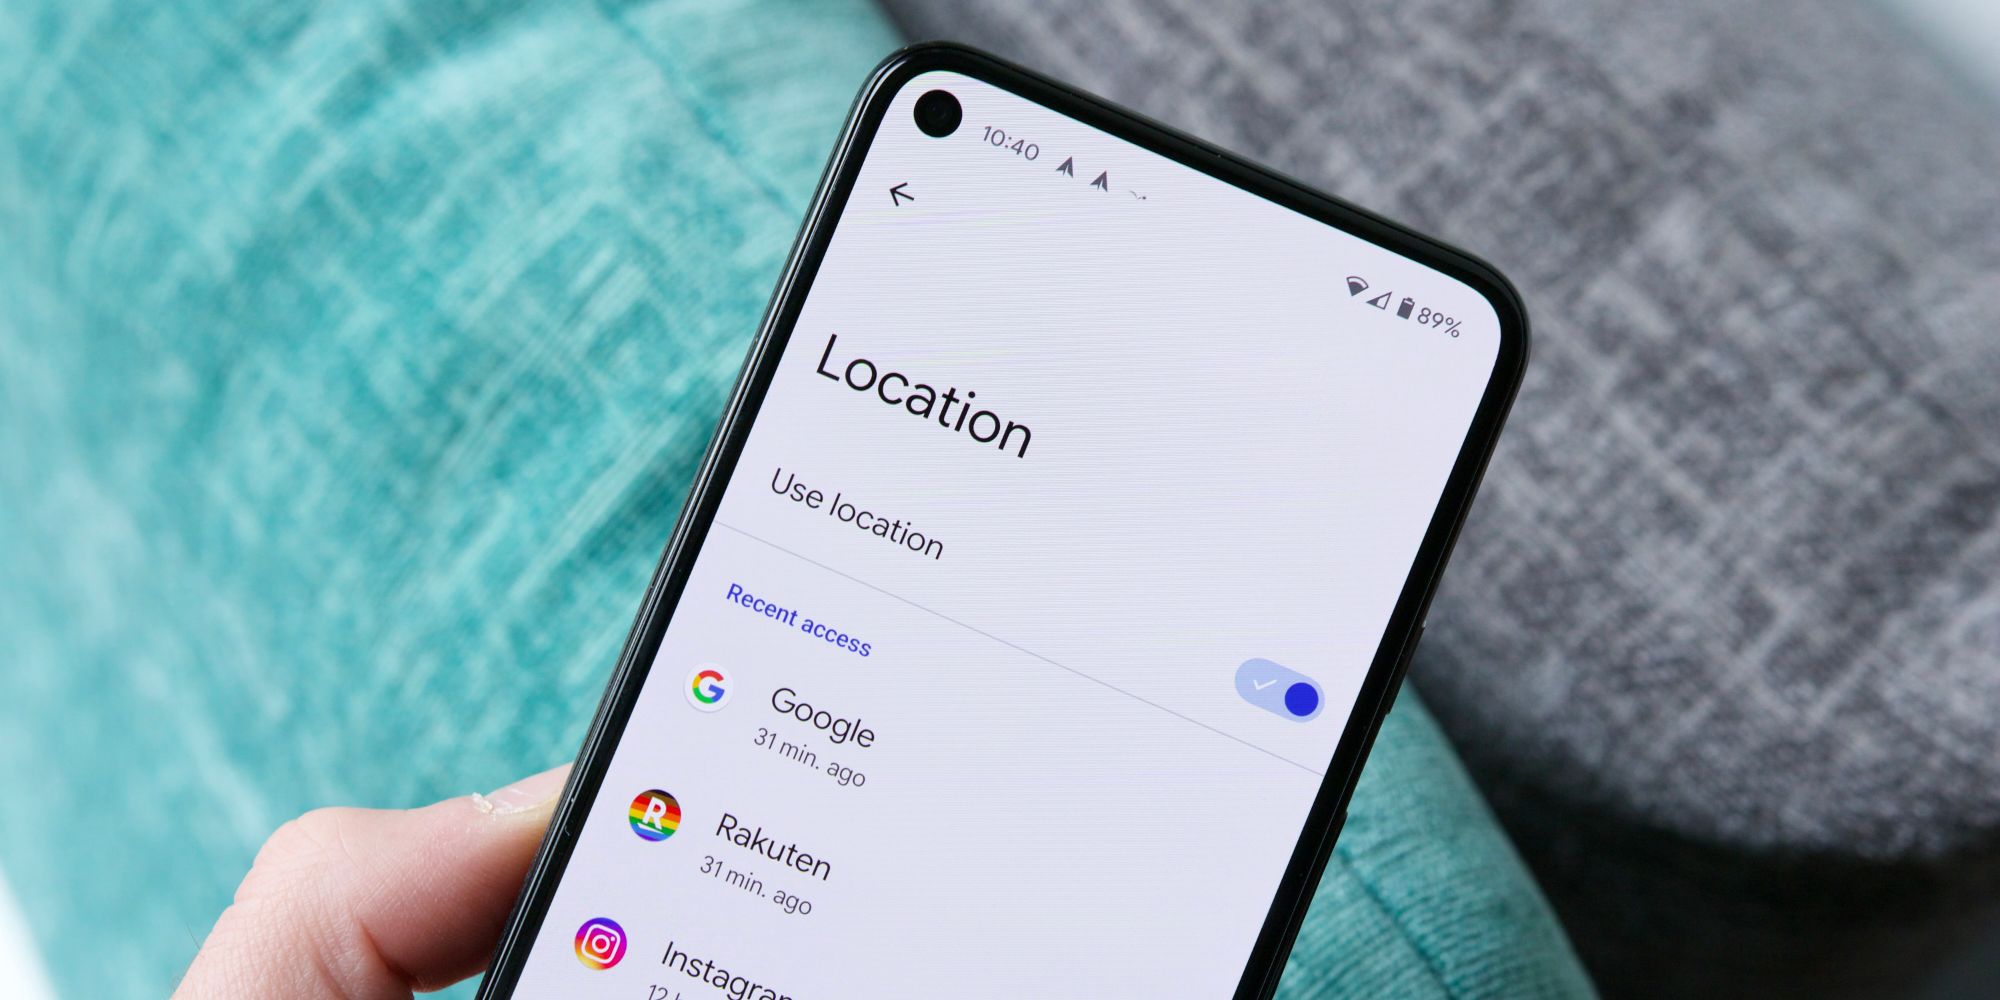 Location settings page on an Android phone